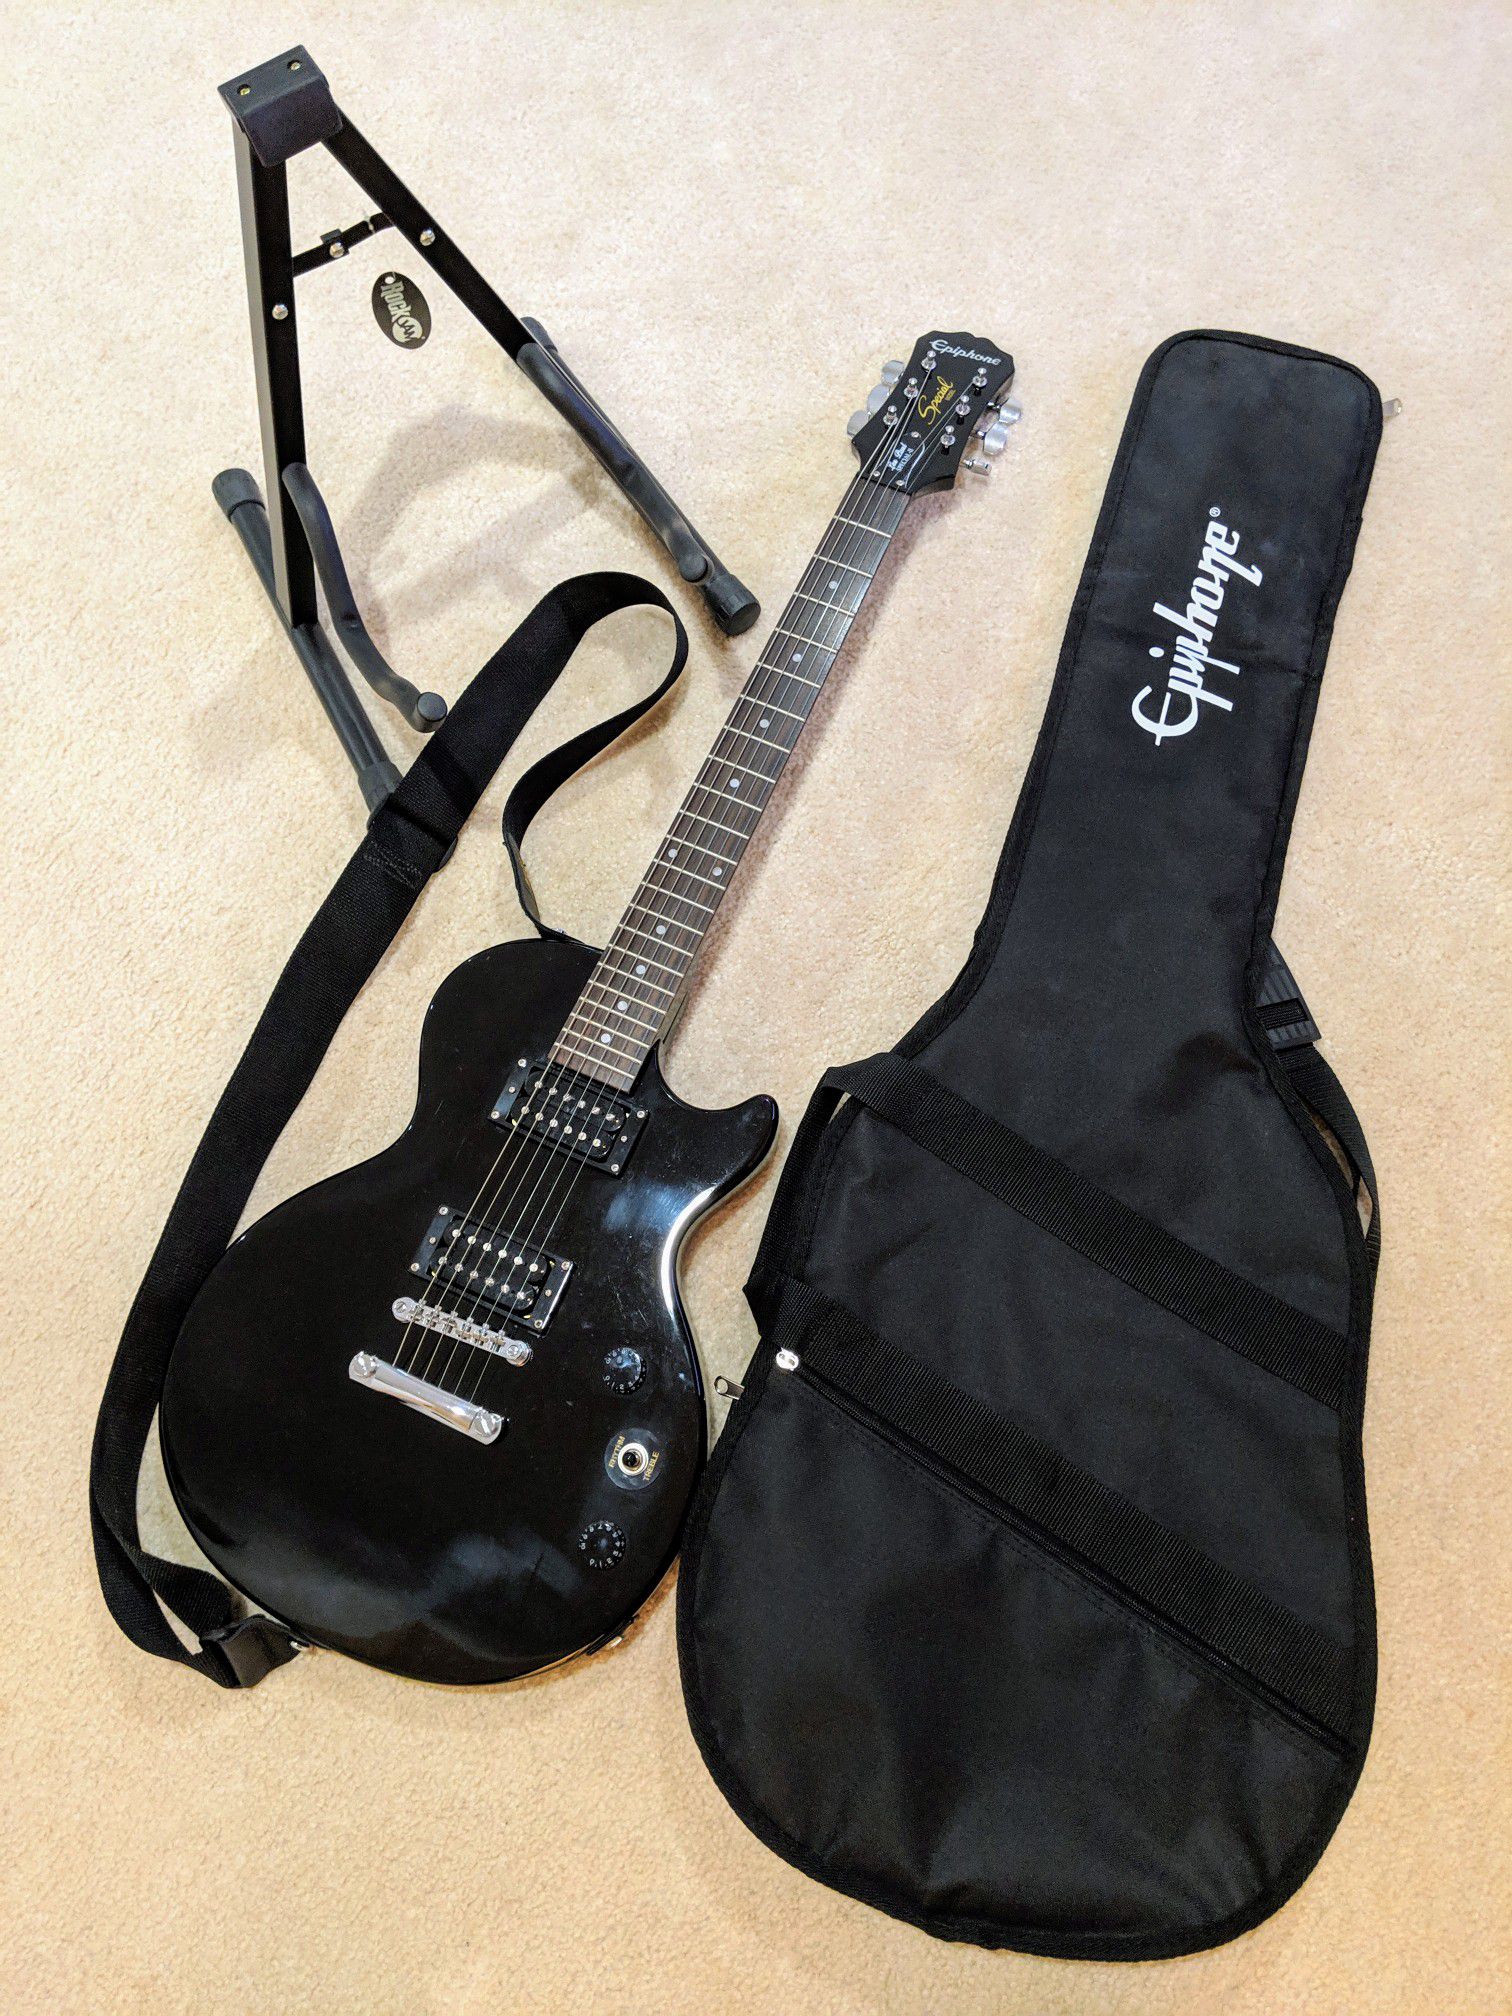 Epiphone Les Paul Special II Electric Guitar with Strap, Bag, and Stand